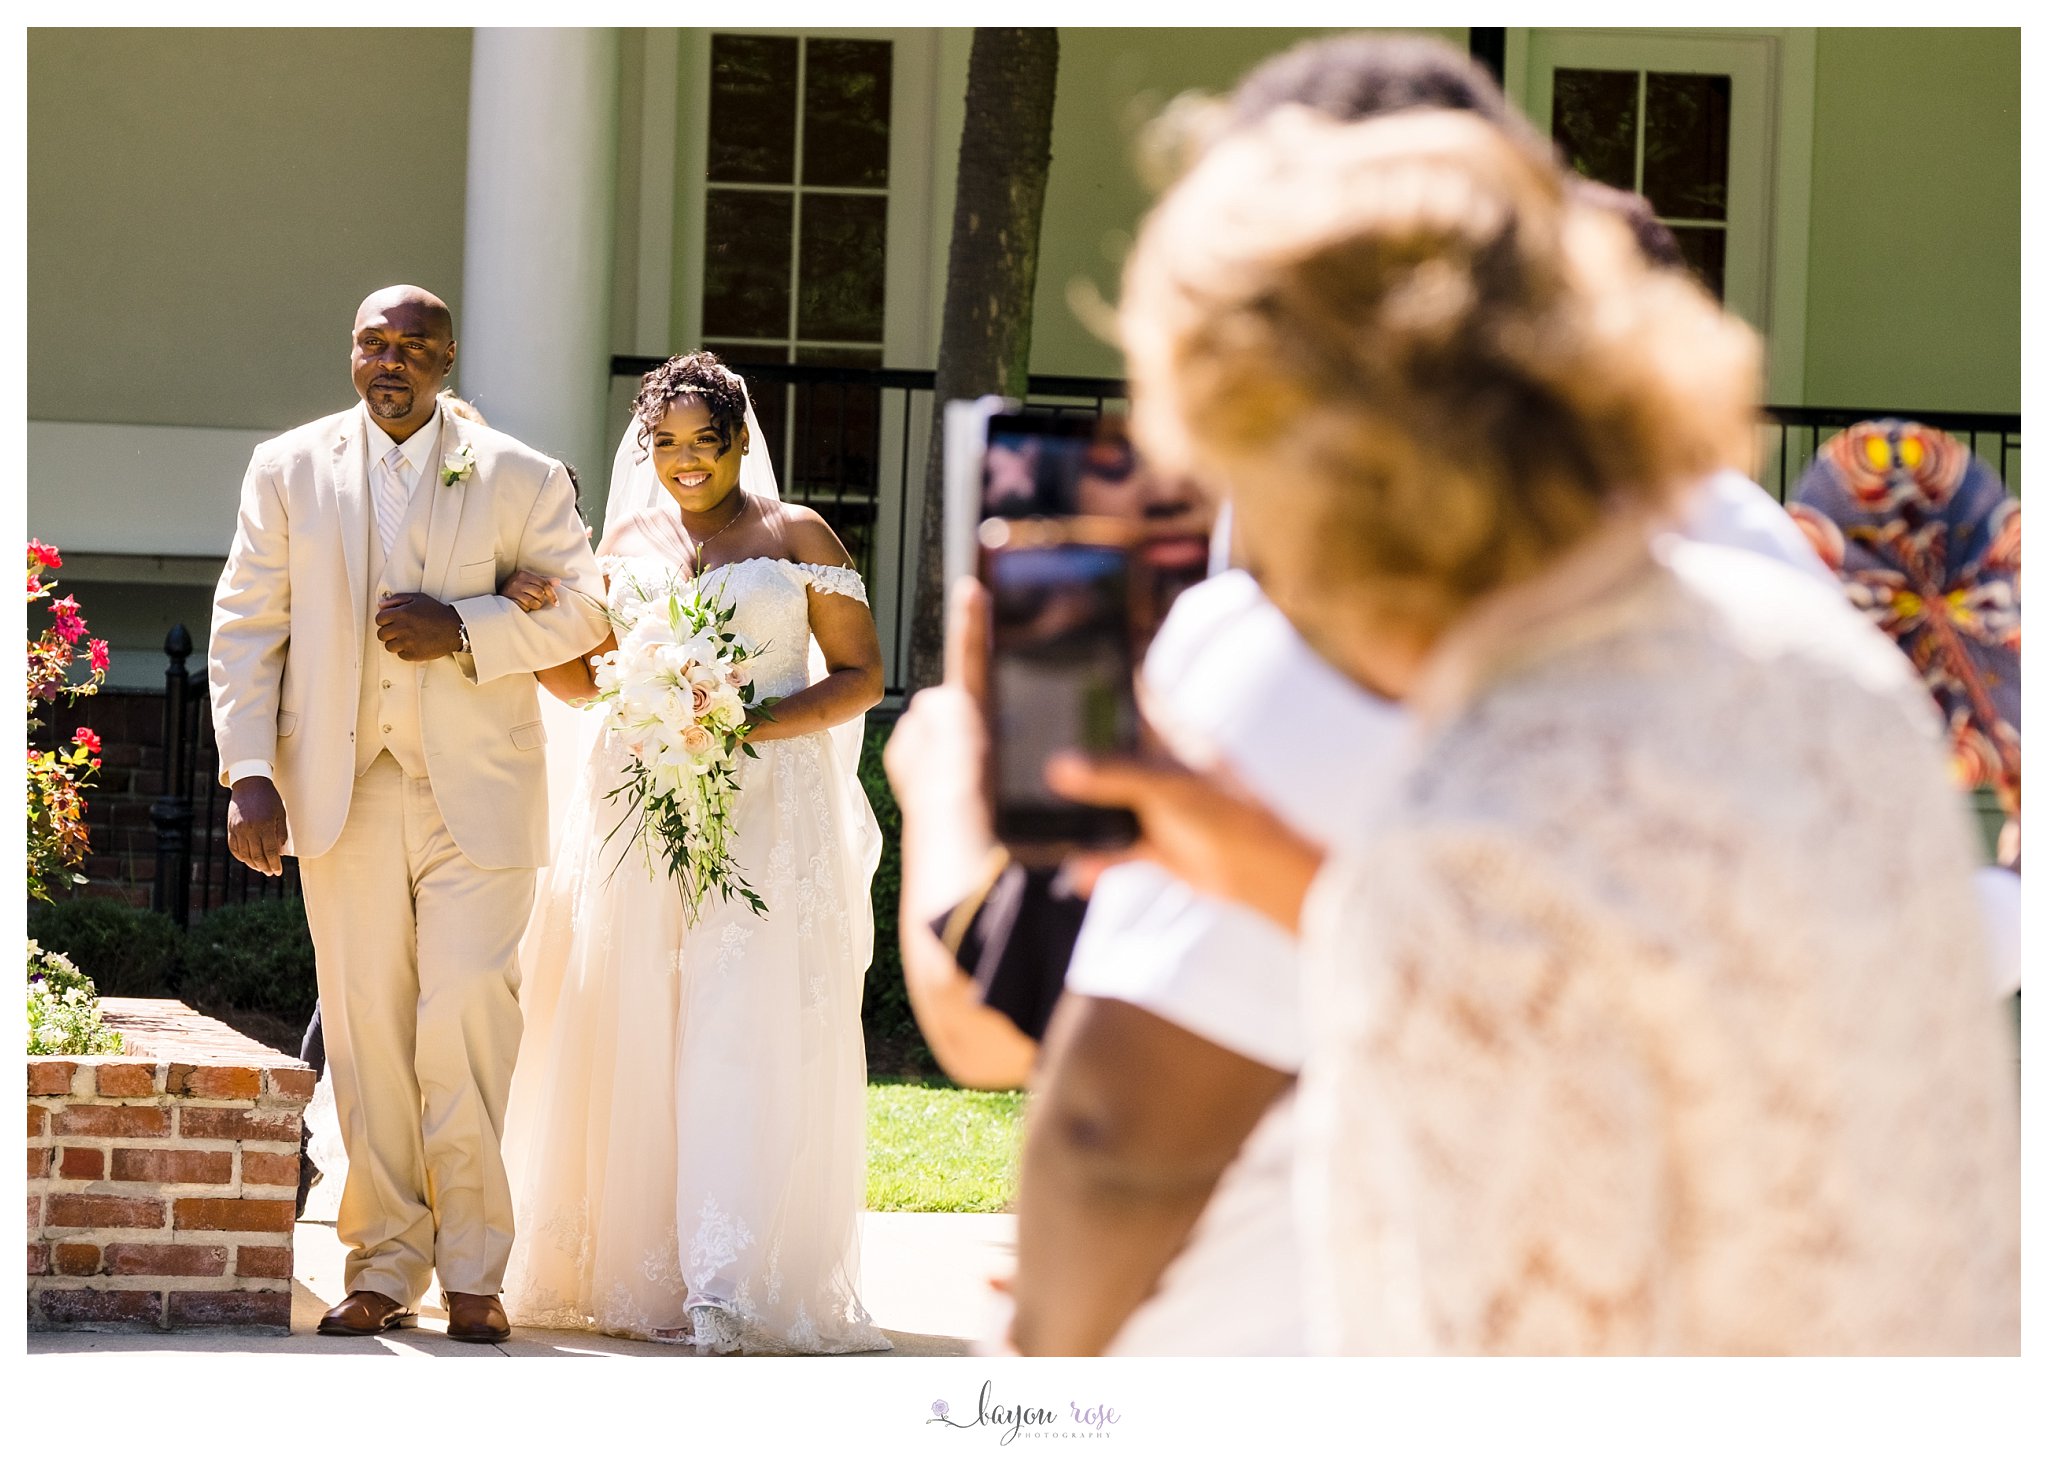 Bride walks down the aisle with her father